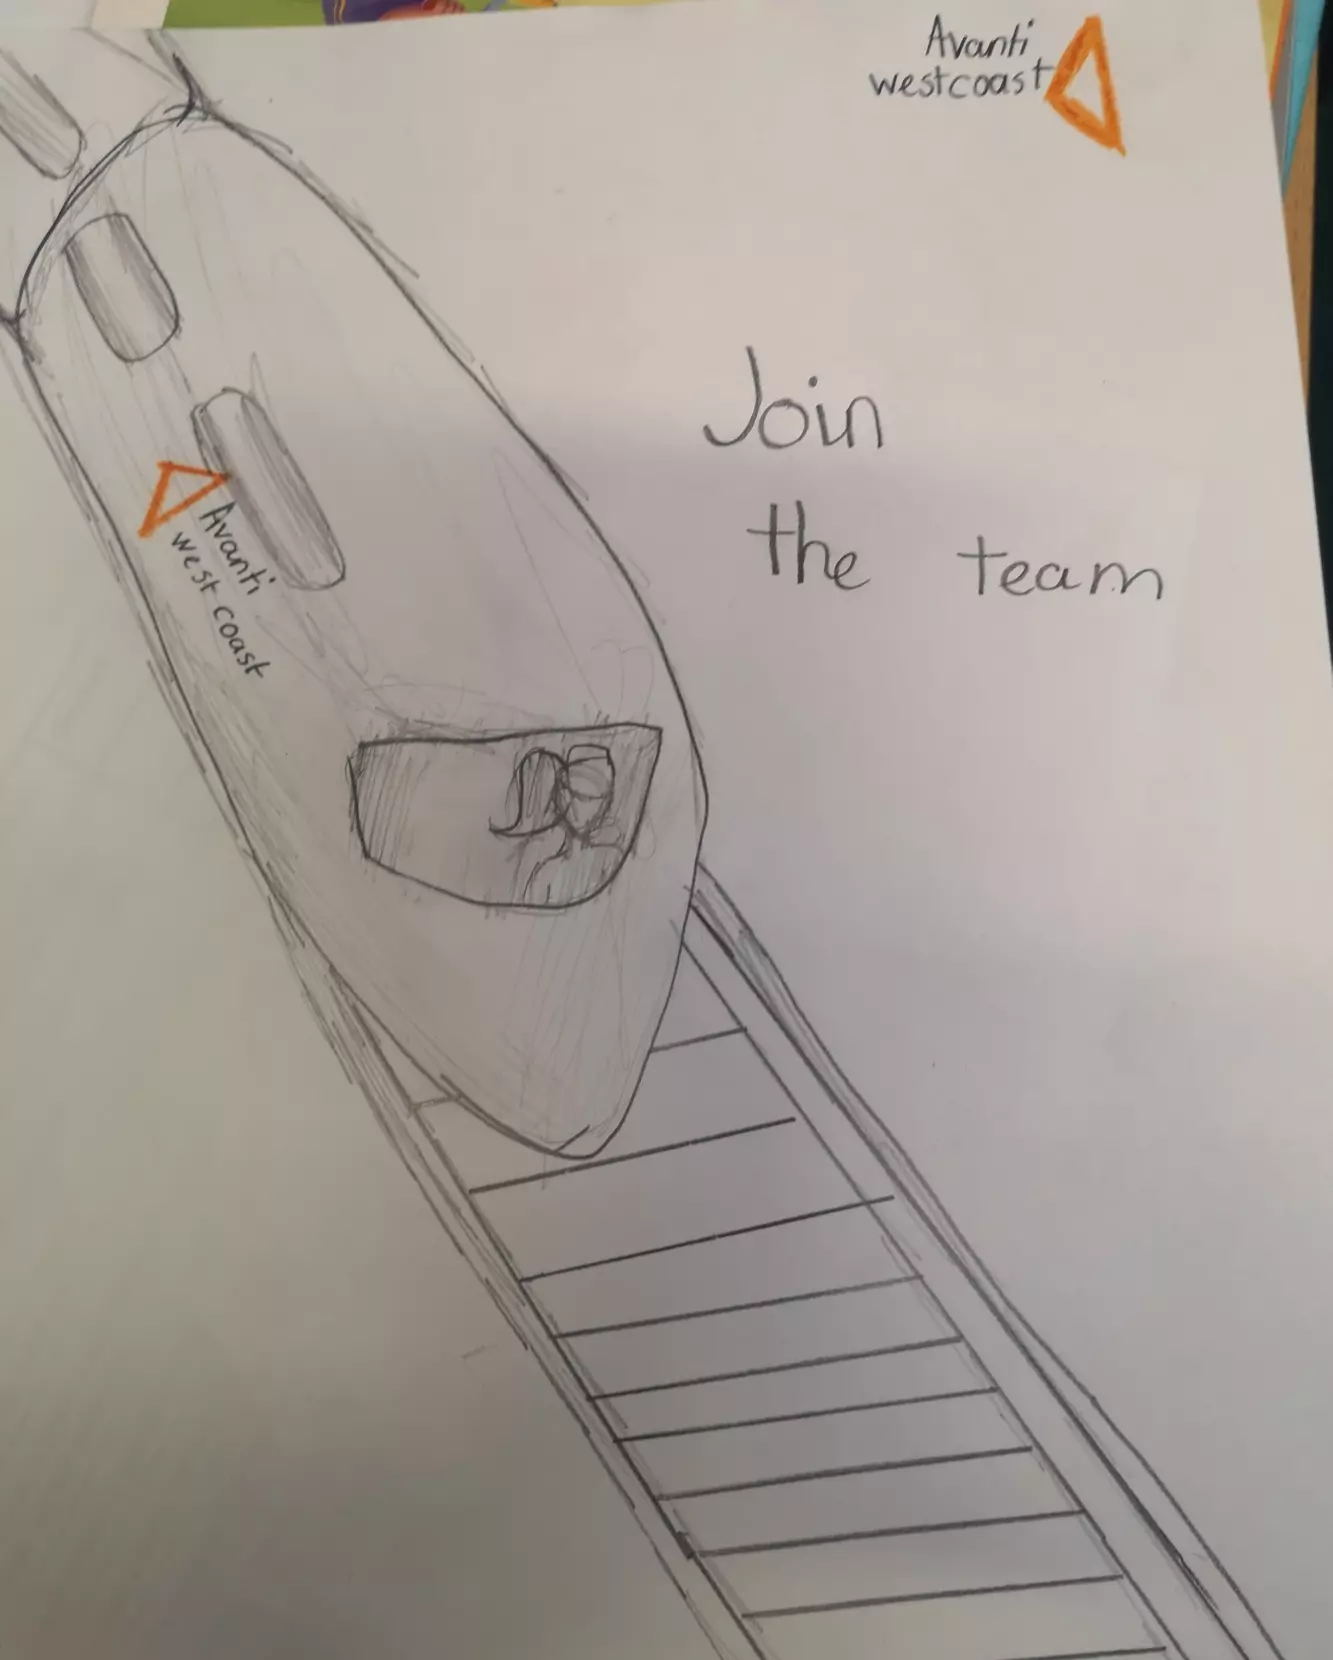 Child's drawing of an Avanti West Coast train with the phrase